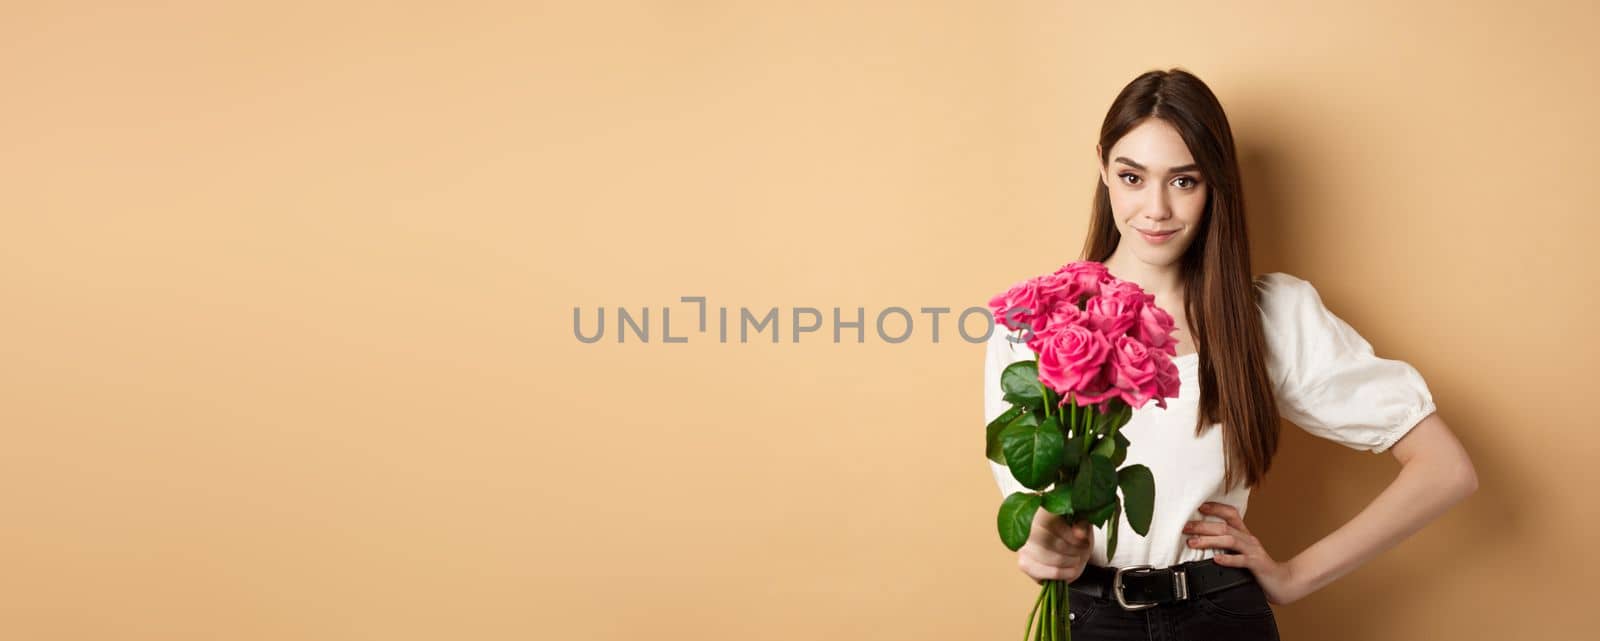 Valentines day. Beautiful girlfriend holding pink roses and looking at camera. Young woman receive flowers from her date, standing on beige background.